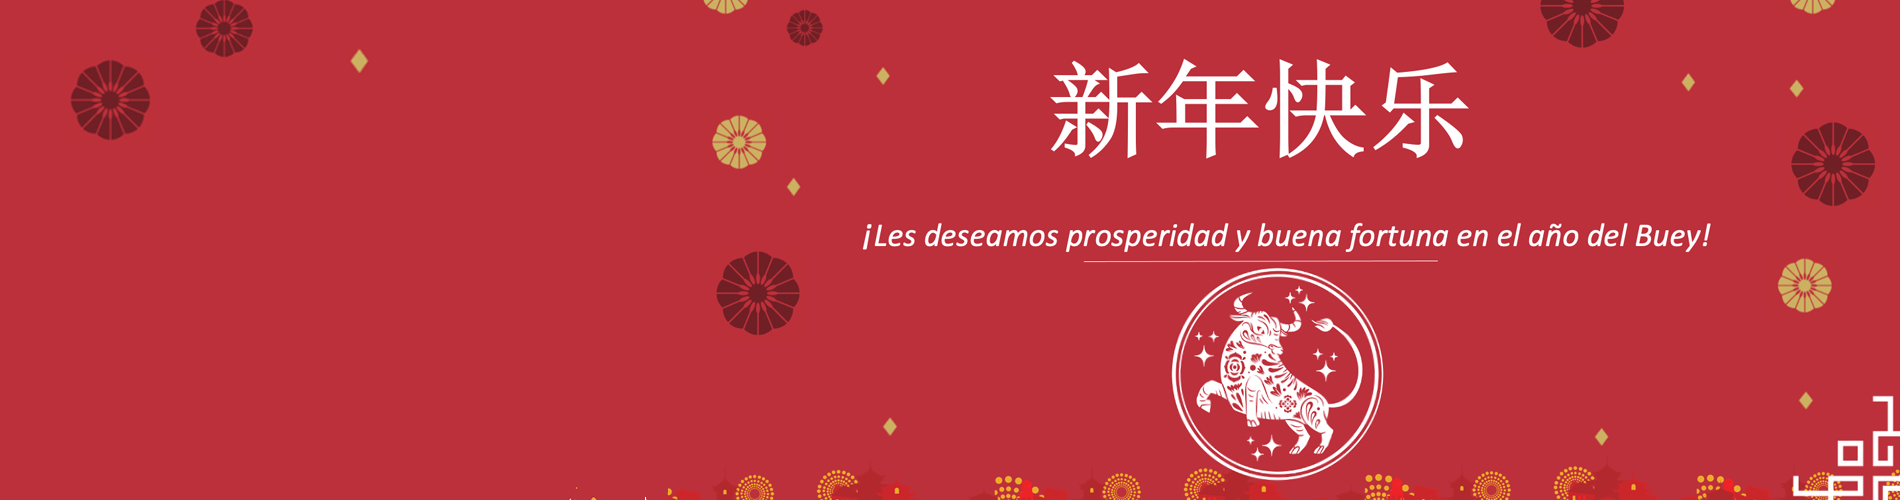 homepage_banner_chinese_new_year_es